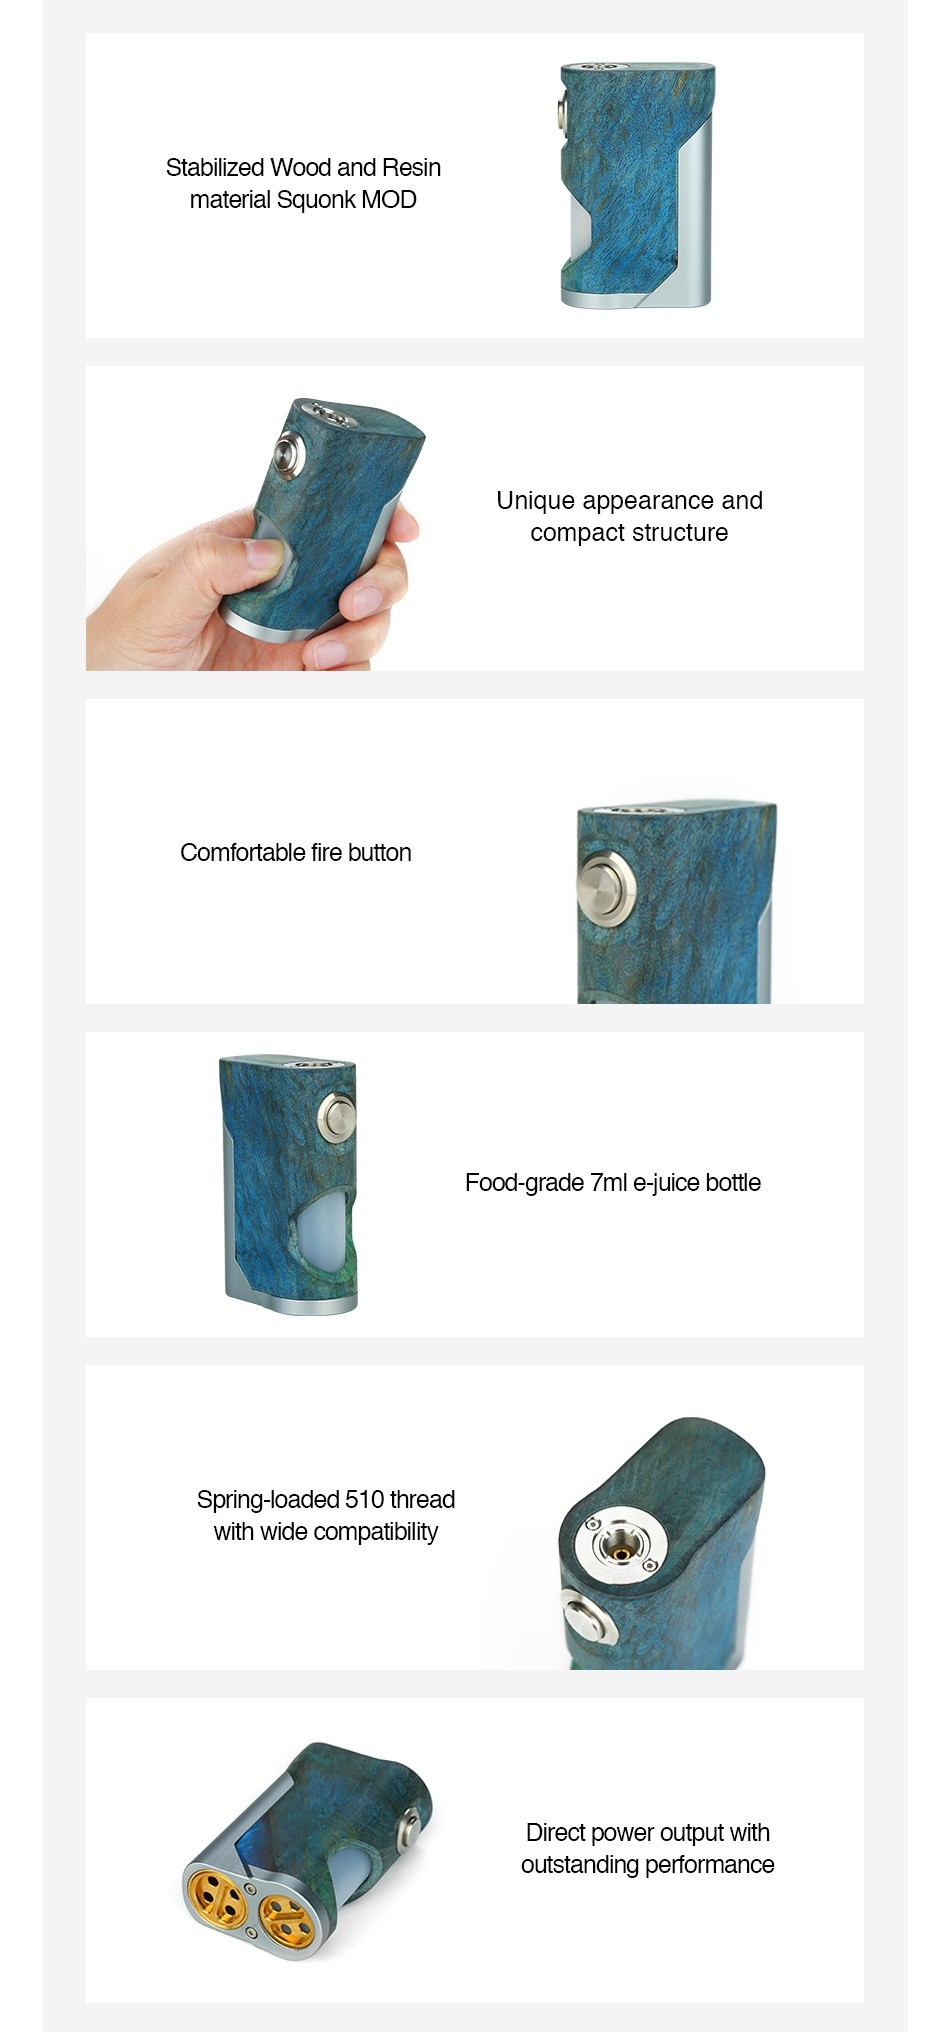 Arctic Dolphin Soul Stabilized Wood Squonk MOD Stabilized wood and resin material Squonk MOd Unique appearance and compact structure Comfortable fire button Food grade 7ml e iuice bottle Spring loaded 510 thread with wide compatibility Direct power output with outstanding performance